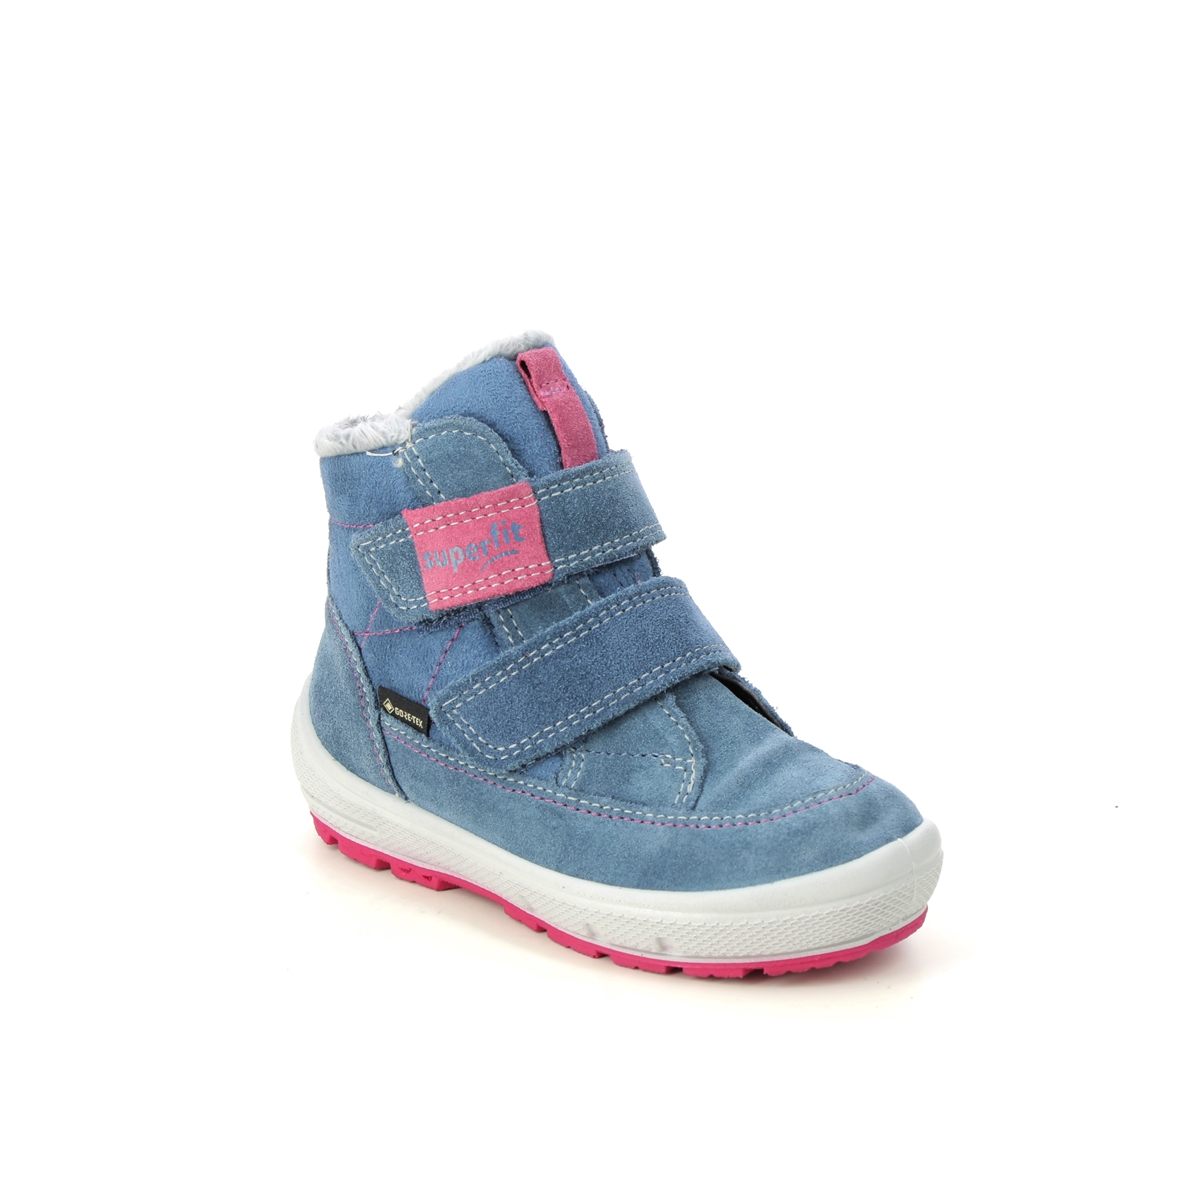 Superfit Groovy Gtx Blue Suede Kids Toddler Girls Boots 1009314-8020 In Size 27 In Plain Blue Suede